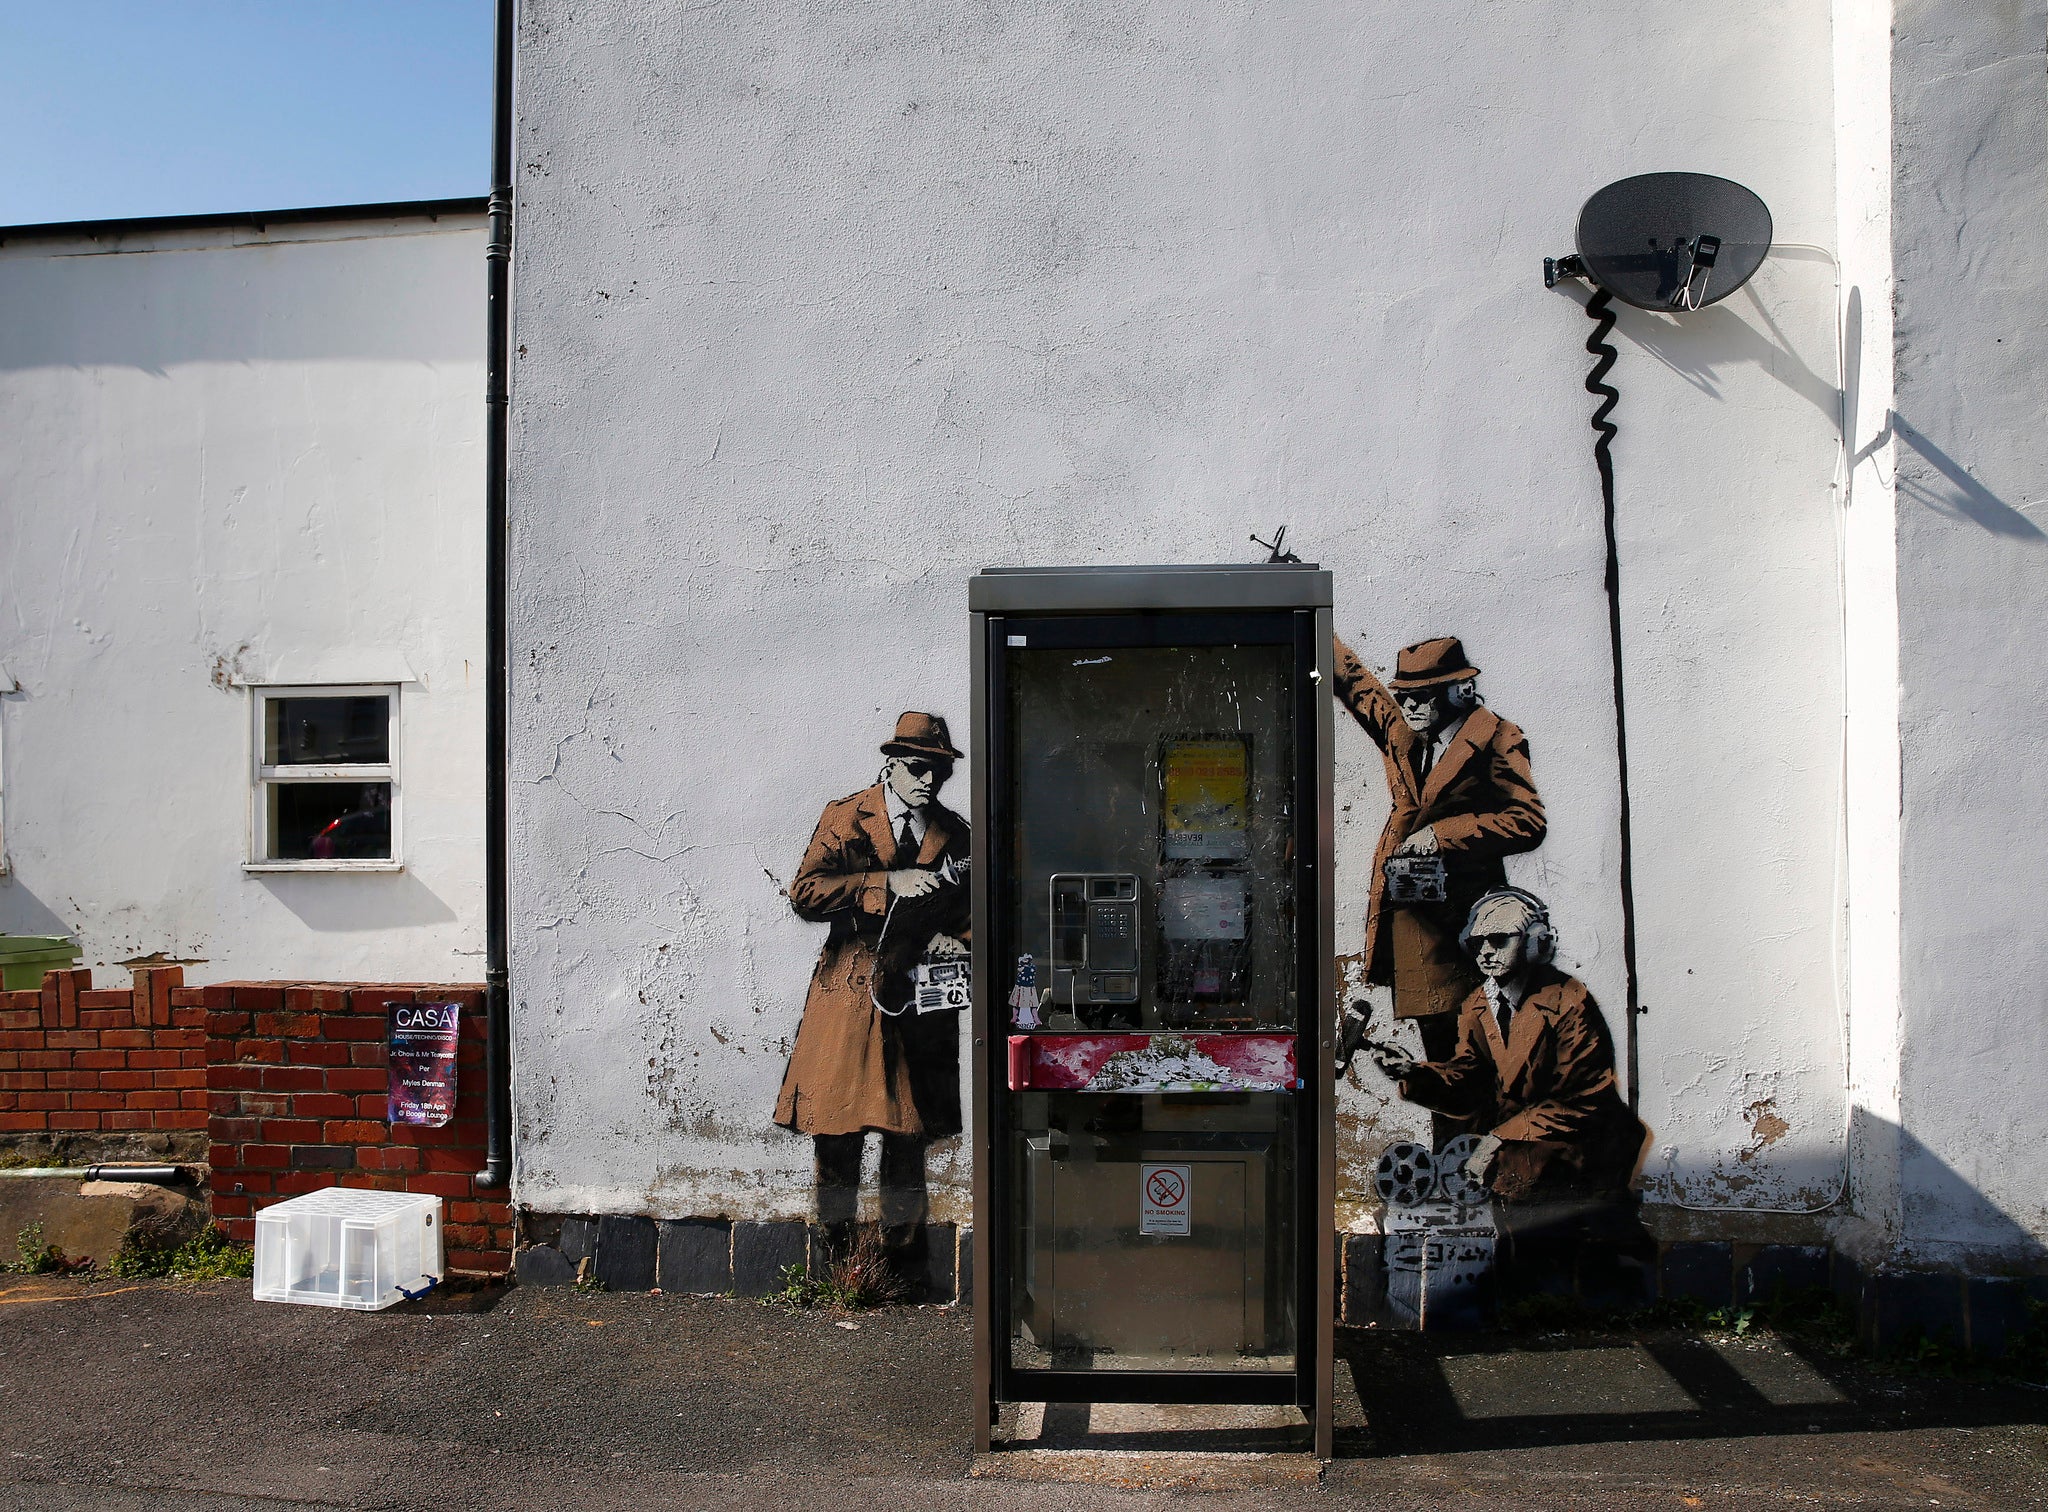 Banksy's mural in Cheltenham has been covered with scaffolding amid fears it's being removed